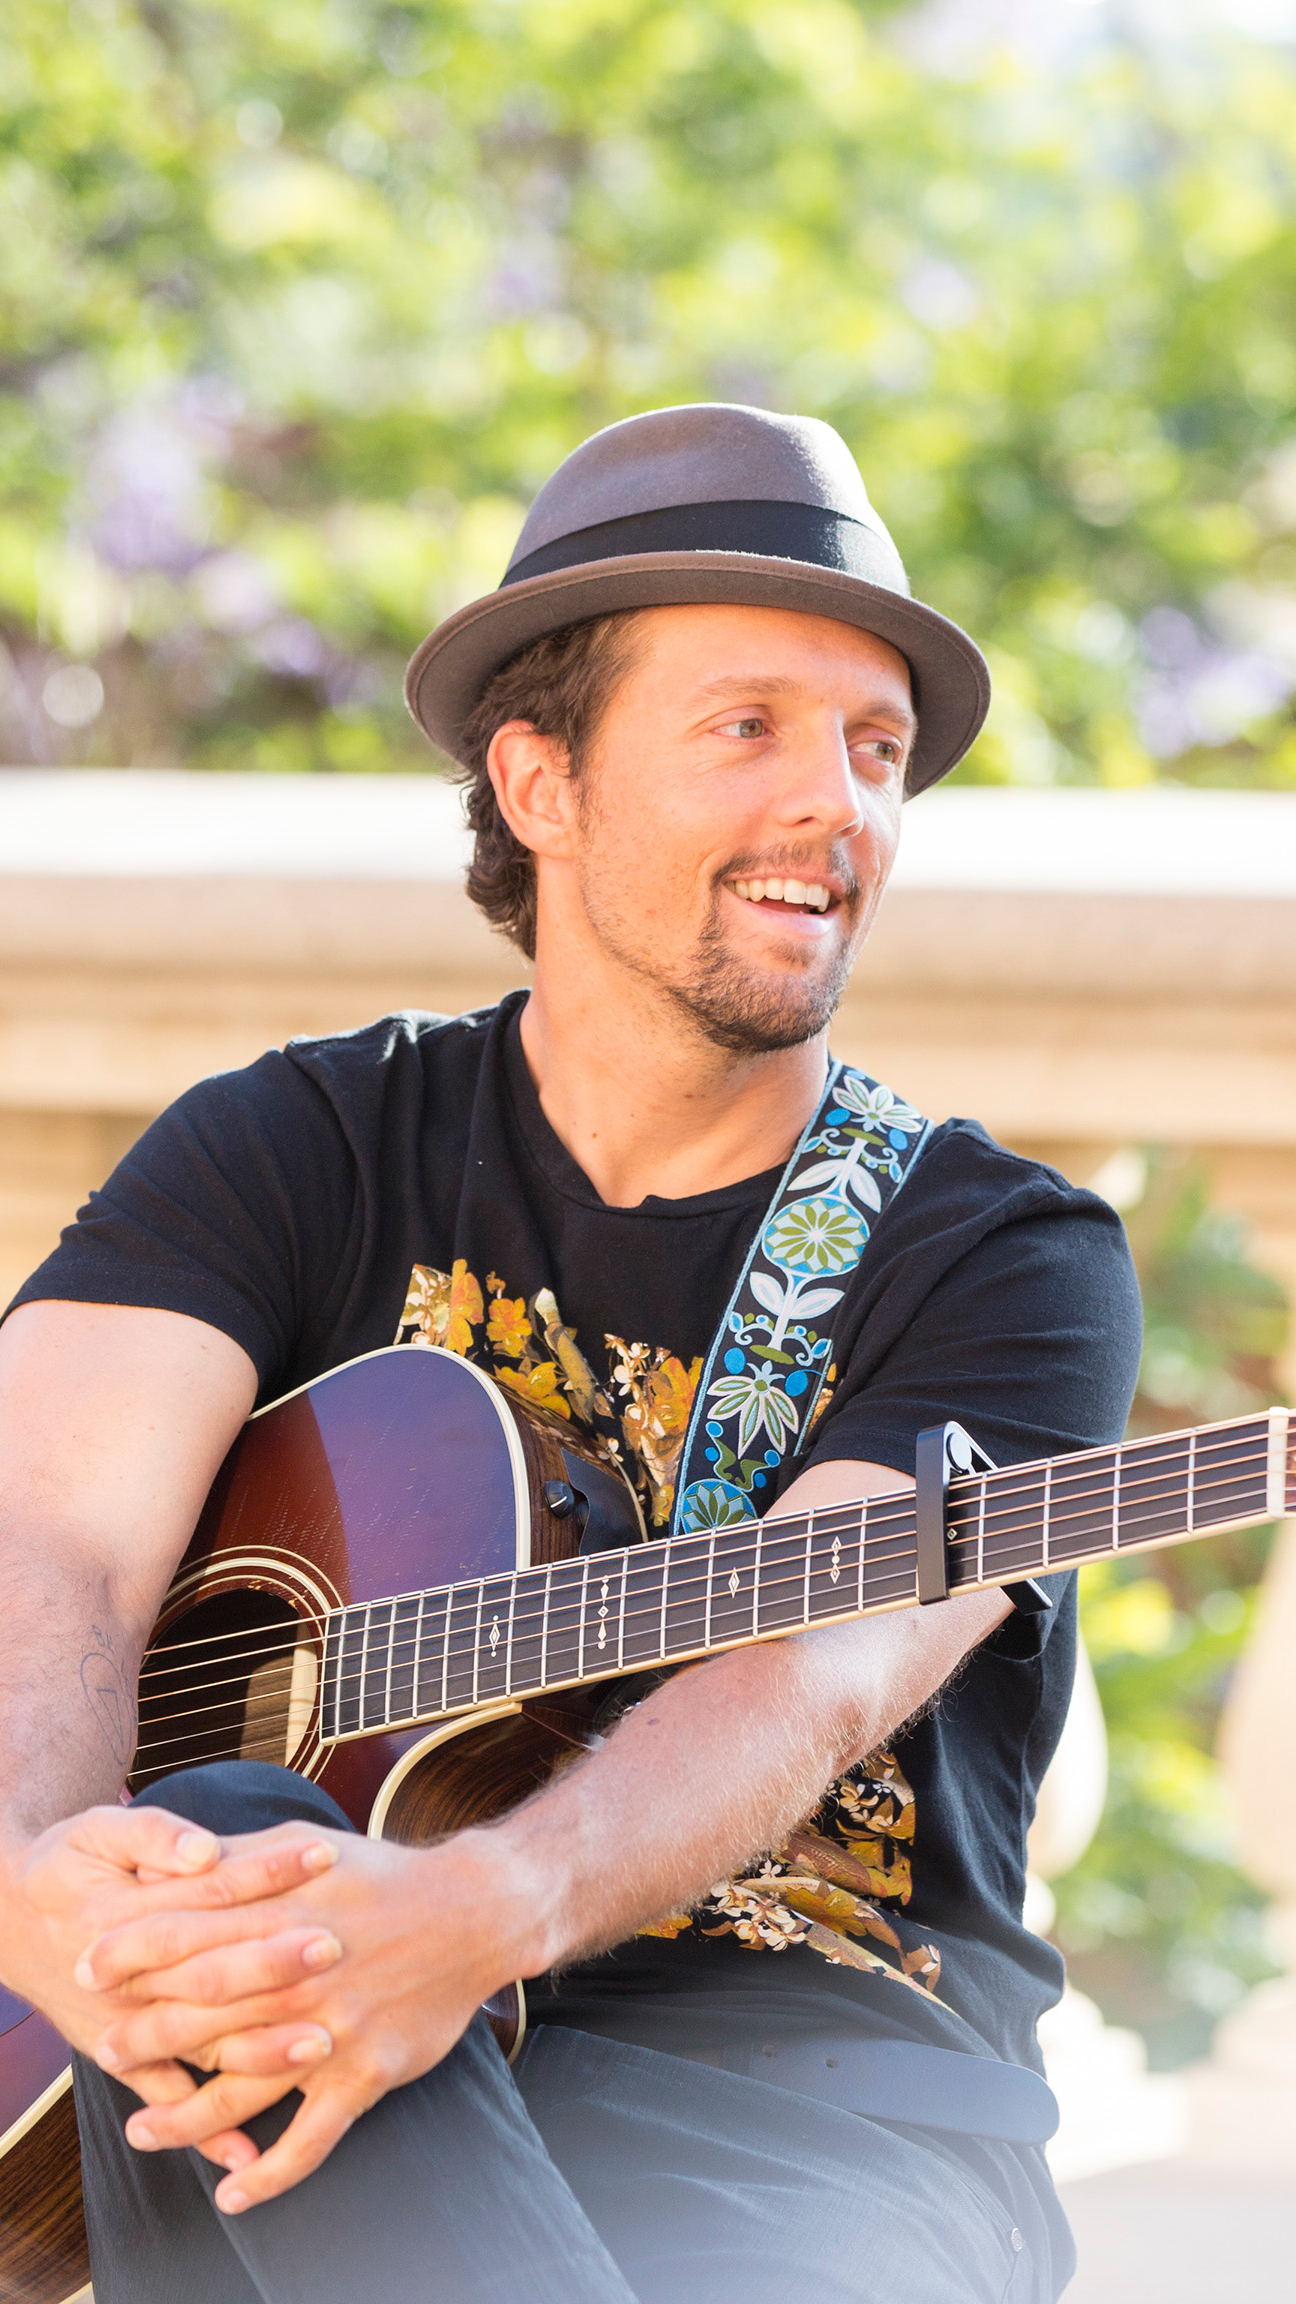 Jason Mraz Performs at The Historic LA theater Royce Hall Live from